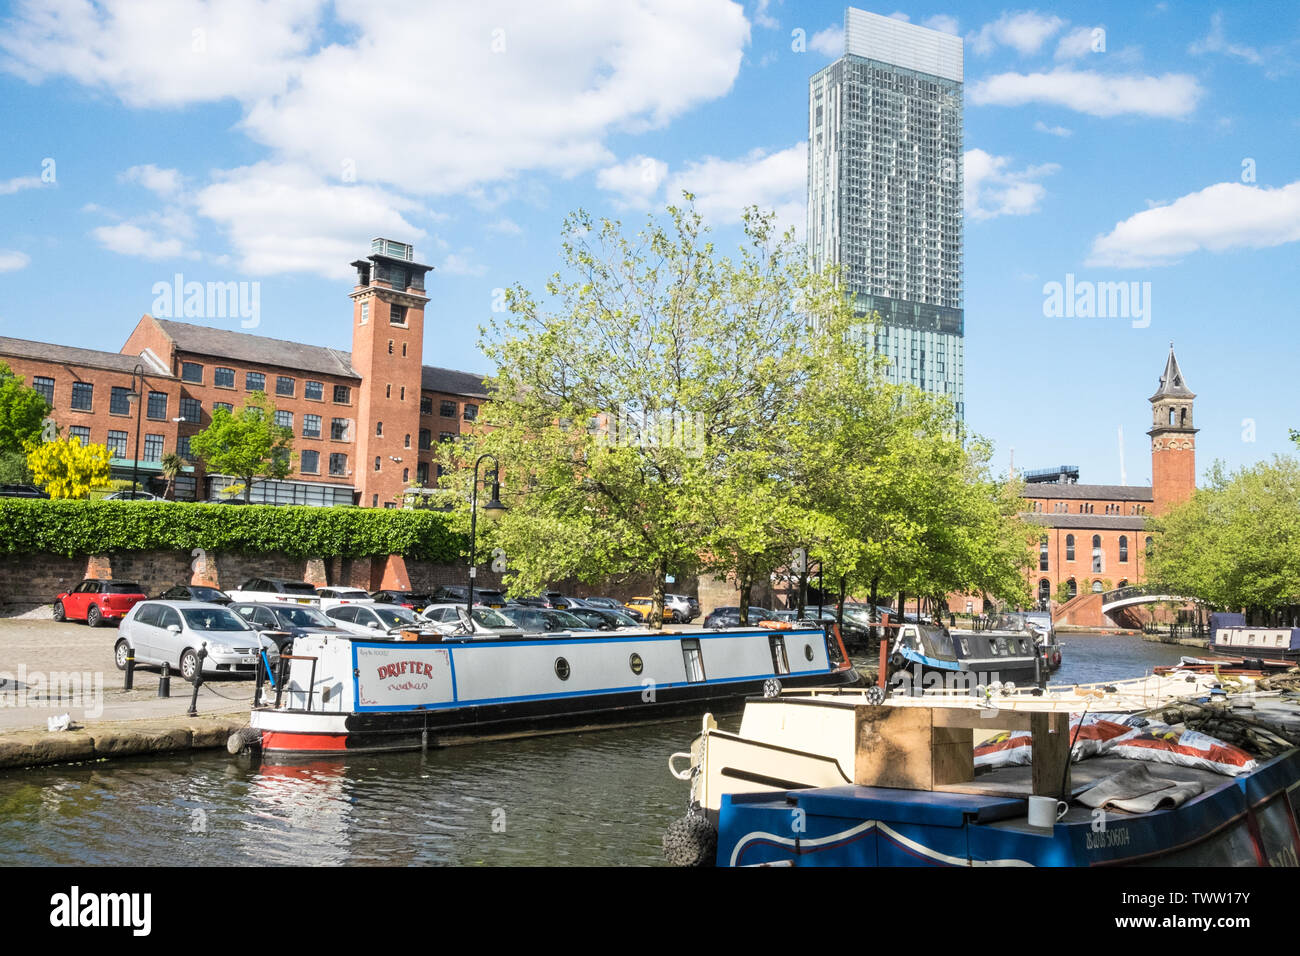 Castlefield Urban Heritage Centre,Castlefield,canal,system,canal boats,Manchester,north,northern,city,north west,England,English,GB,Britain,British,UK Stock Photo